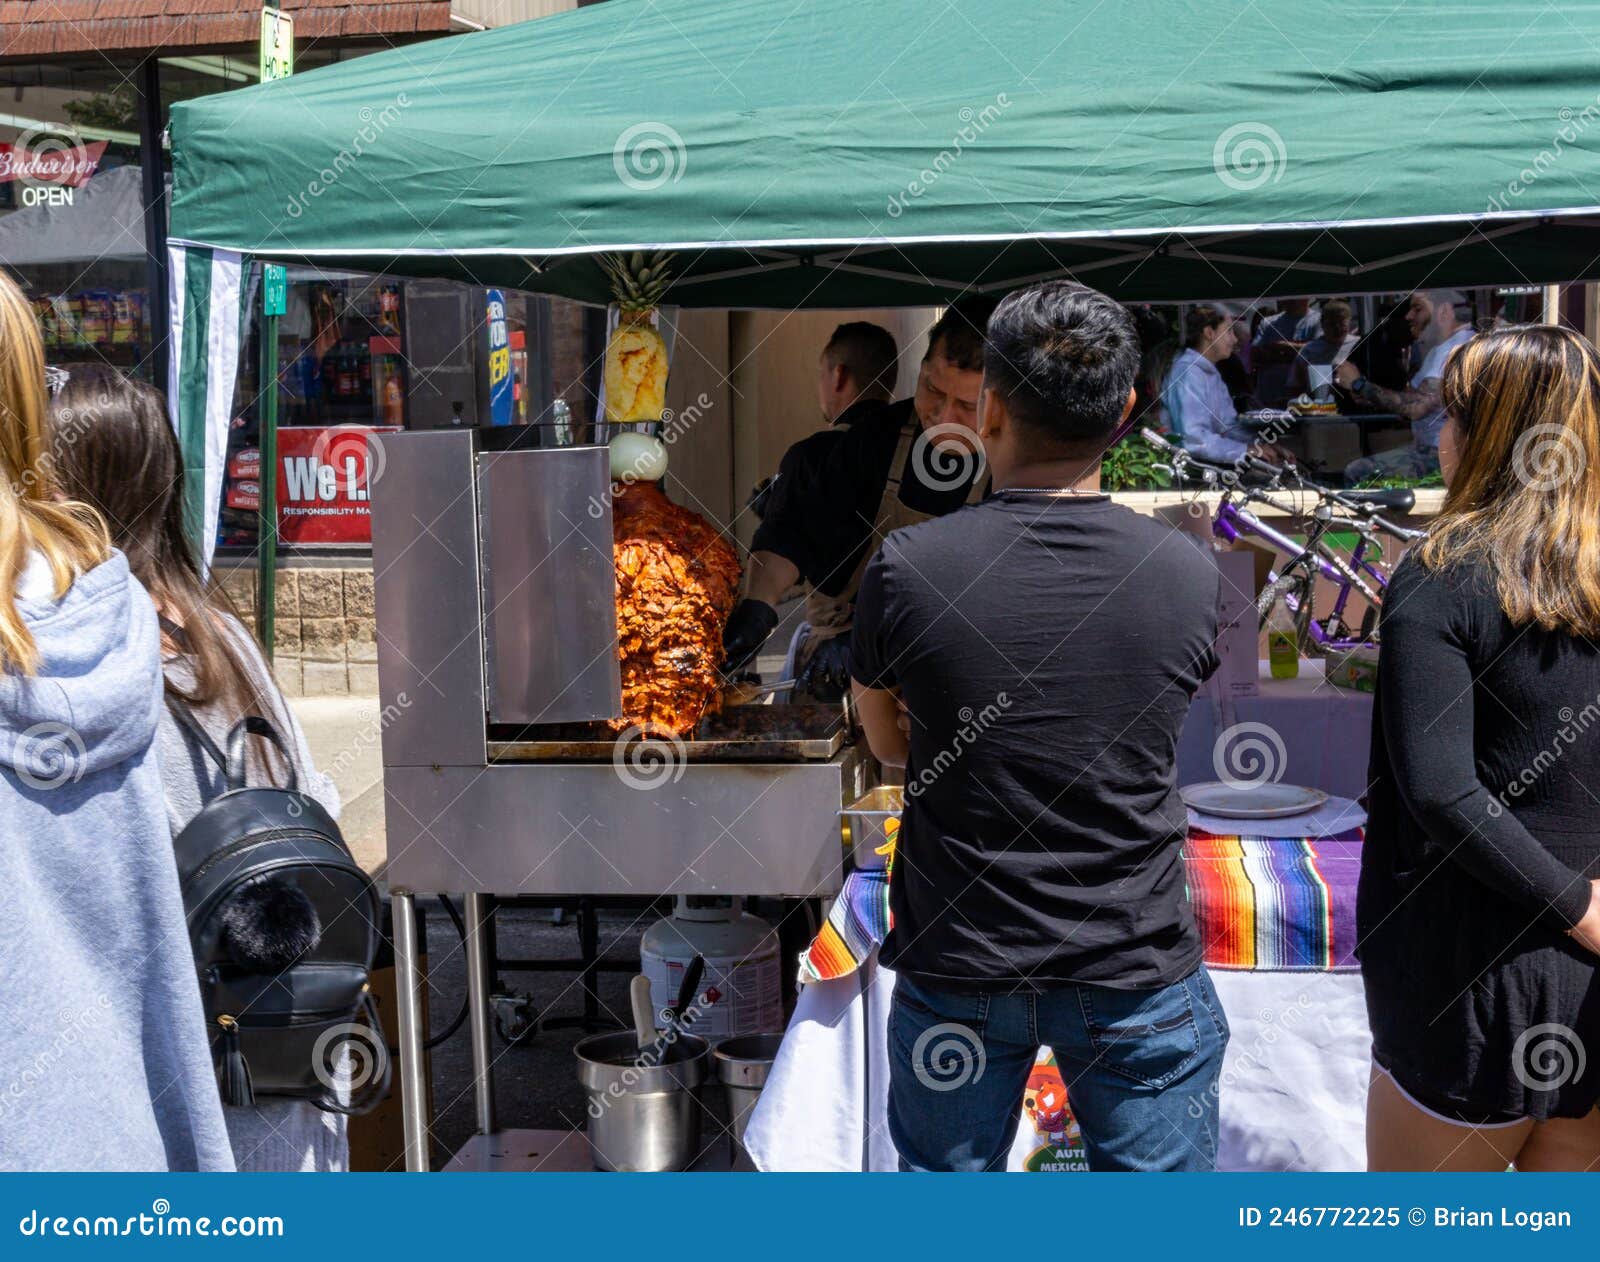 View of Street Food Being Prepared for Customers at the Annual Suffern